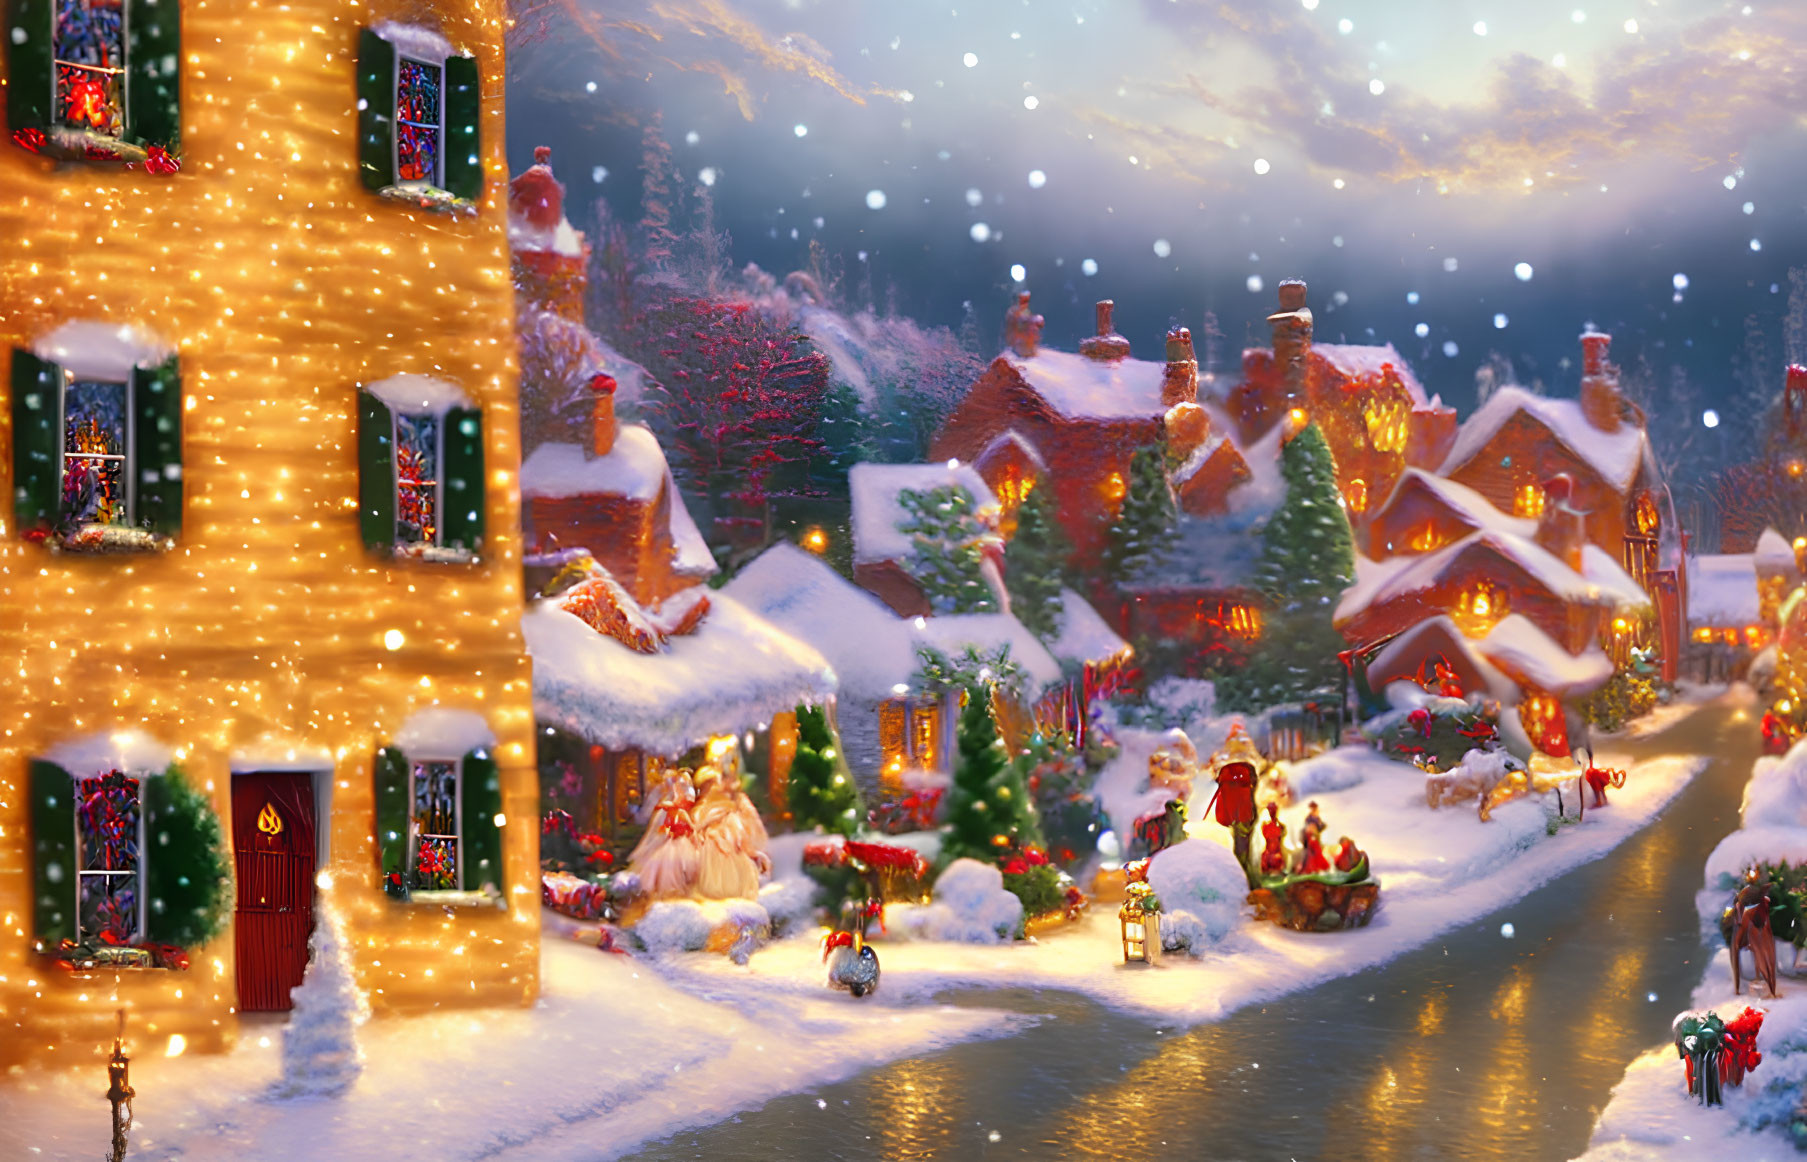 Festive Christmas village with lights, decorations, and snow